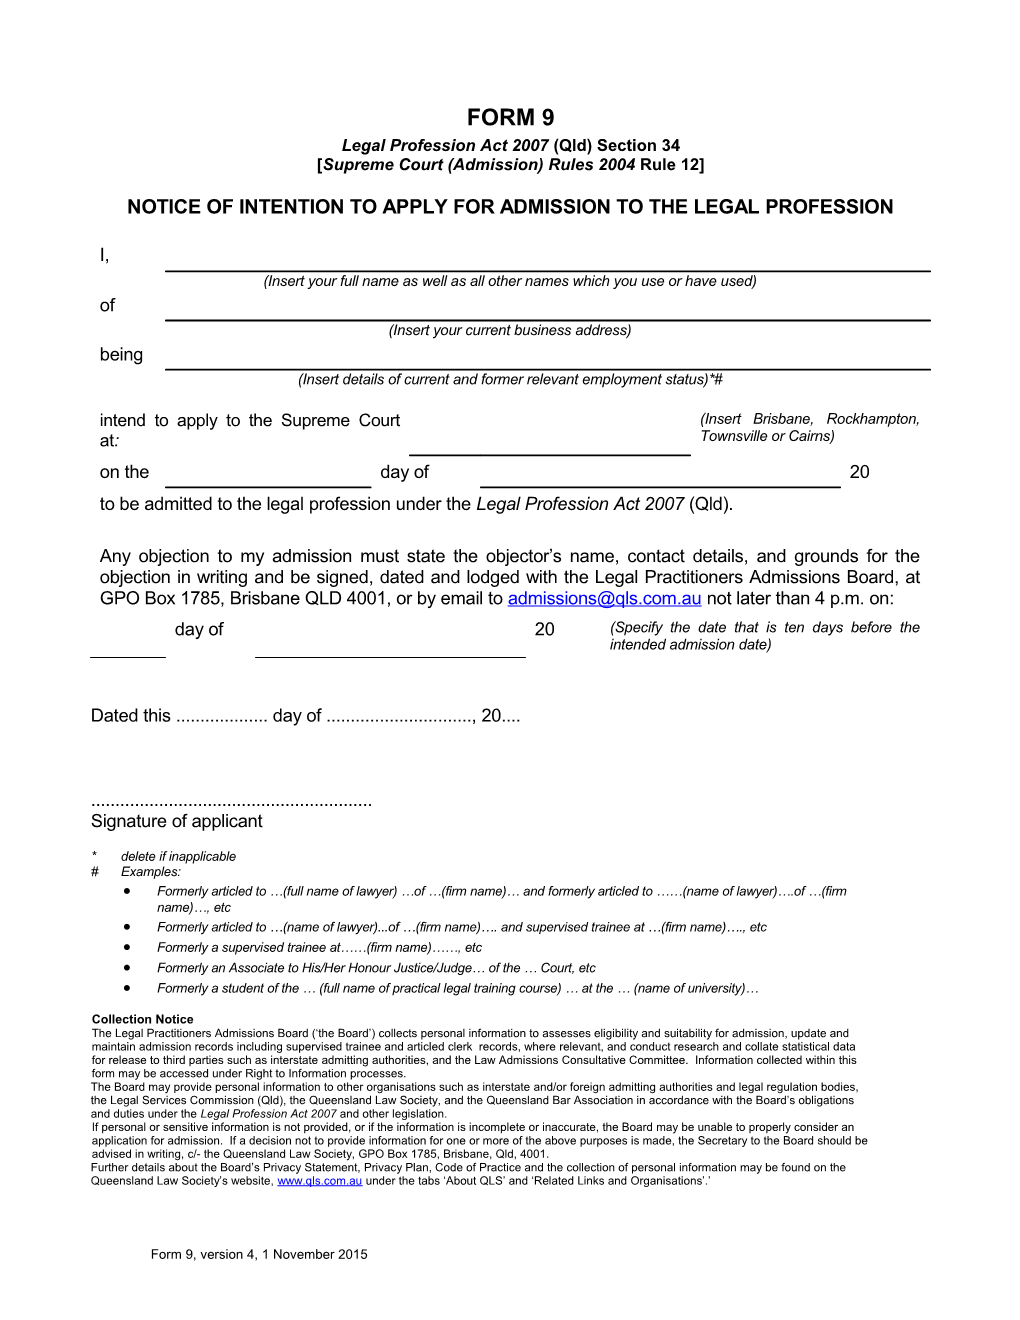 Legal Practitioner Admissions Rules 2004 - Form 9